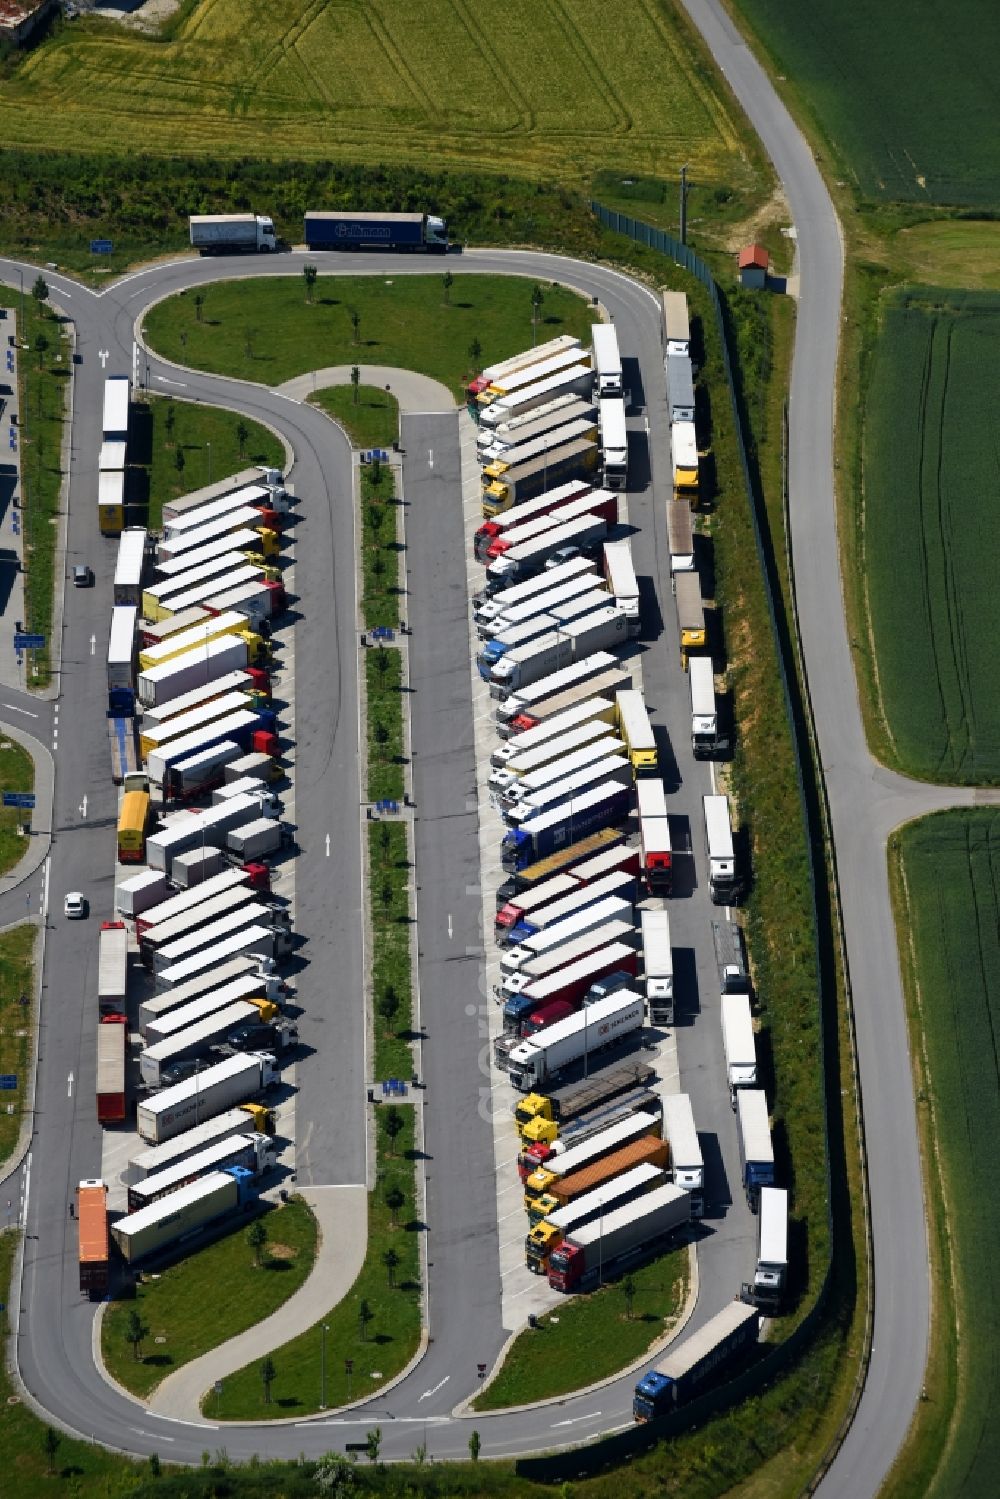 Aerial image Schalding r.d.Donau - Lorries - parking spaces at the highway rest stop and parking of the BAB A 3 of Ladesaeule Tank & Rast Donautal Ost in Schalding r.d.Donau in the state Bavaria, Germany